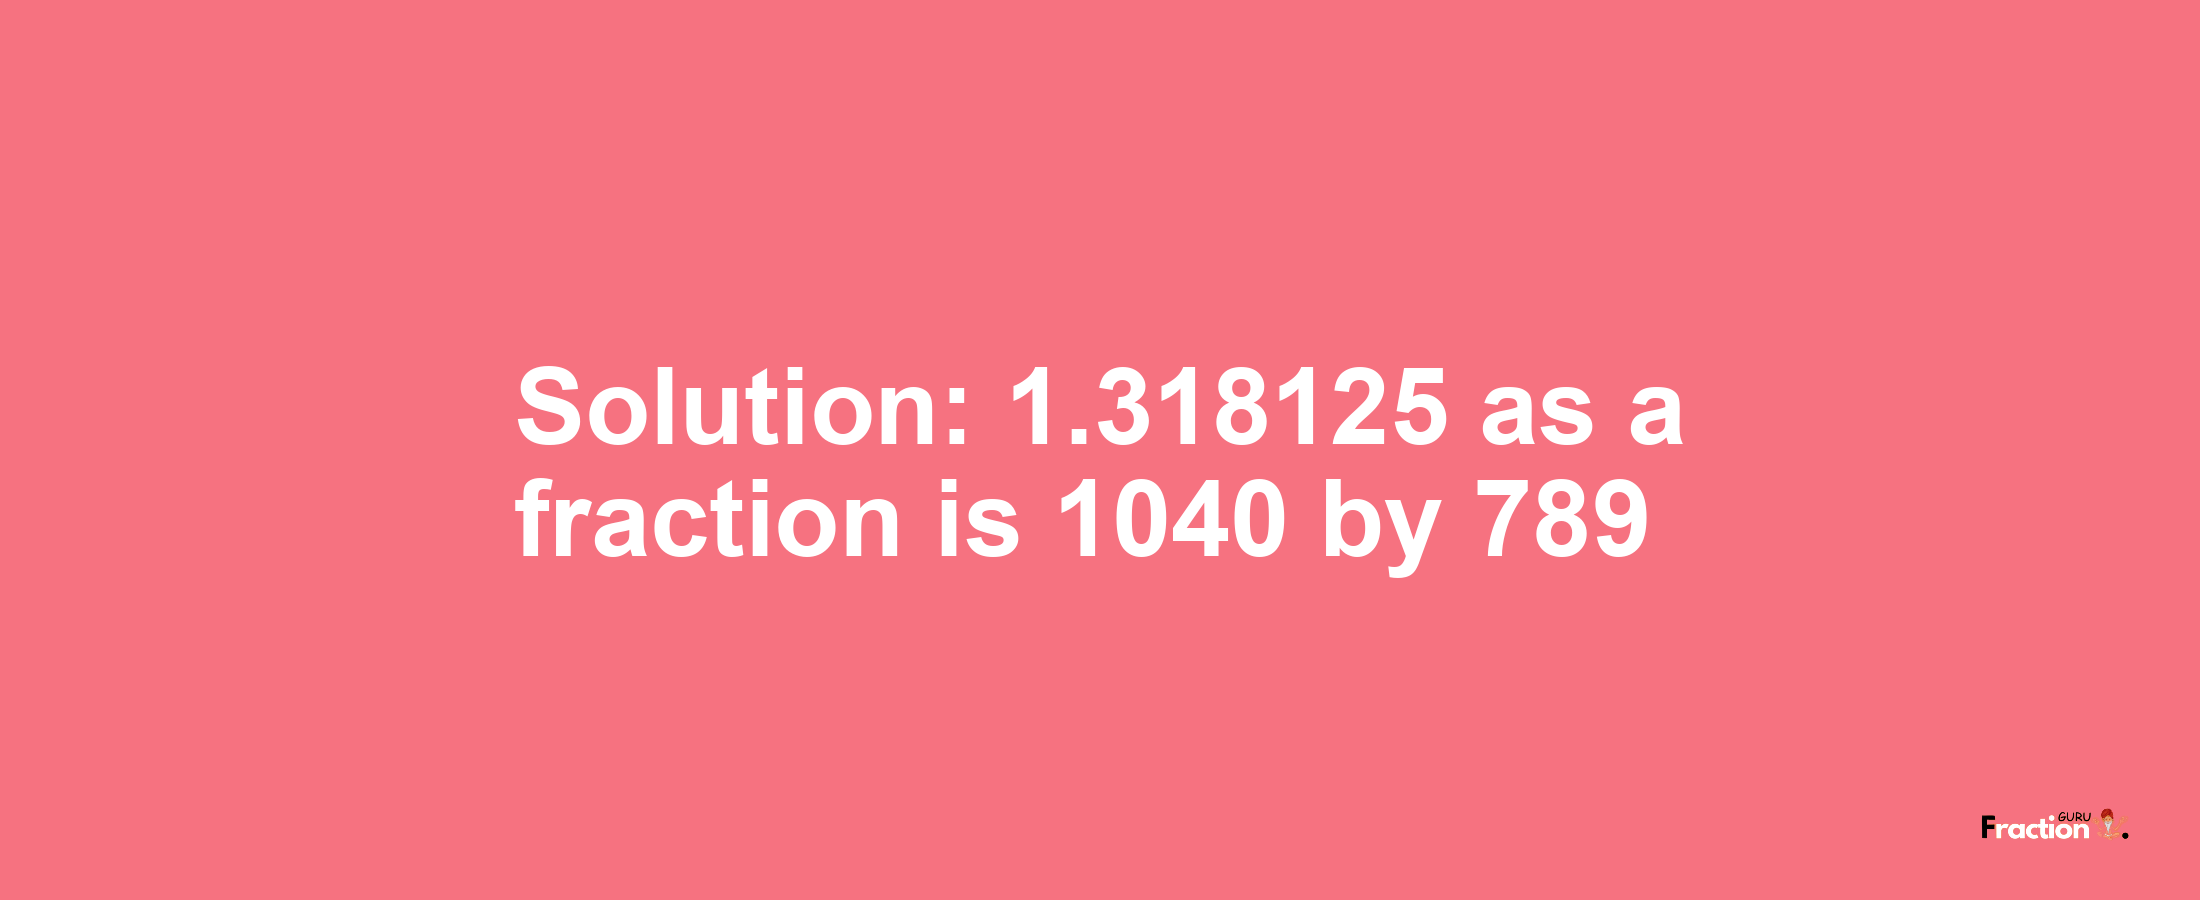 Solution:1.318125 as a fraction is 1040/789